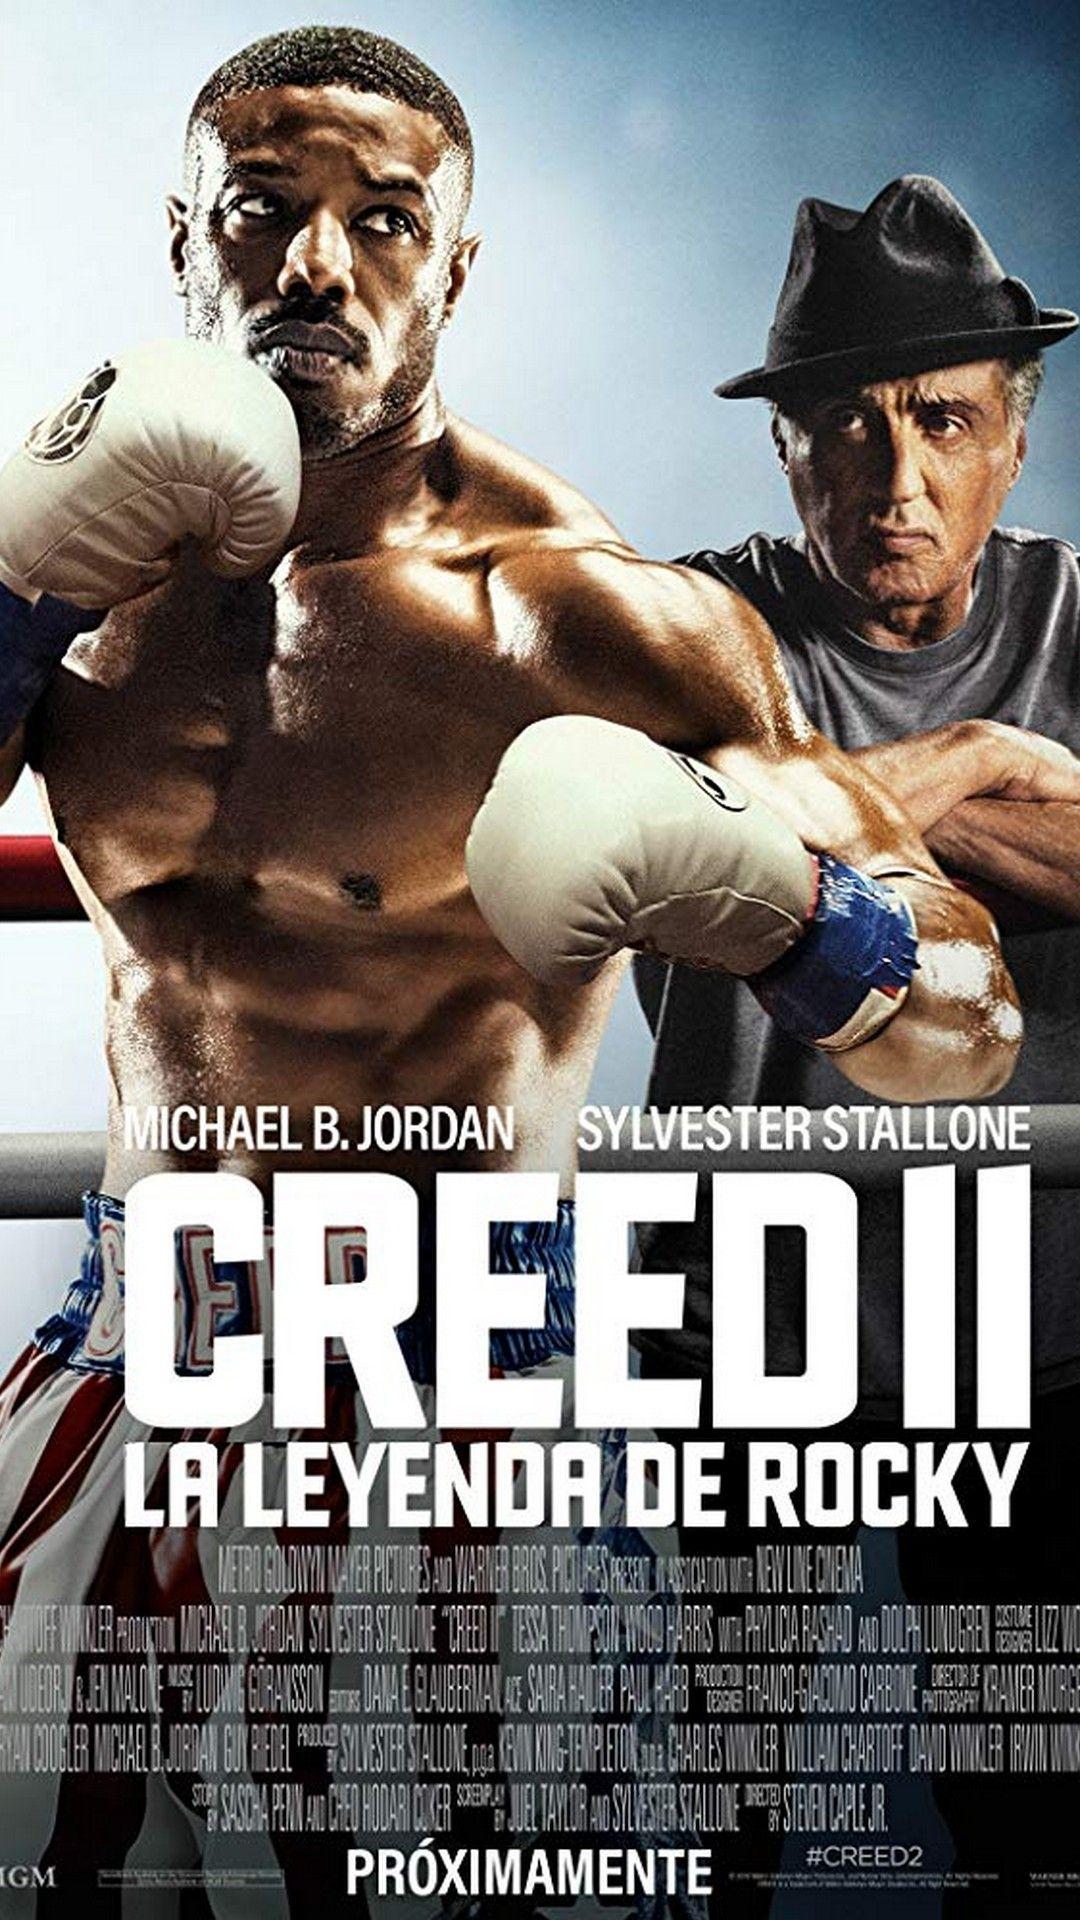 Creed 2 Poster Movie Poster Wallpaper HD